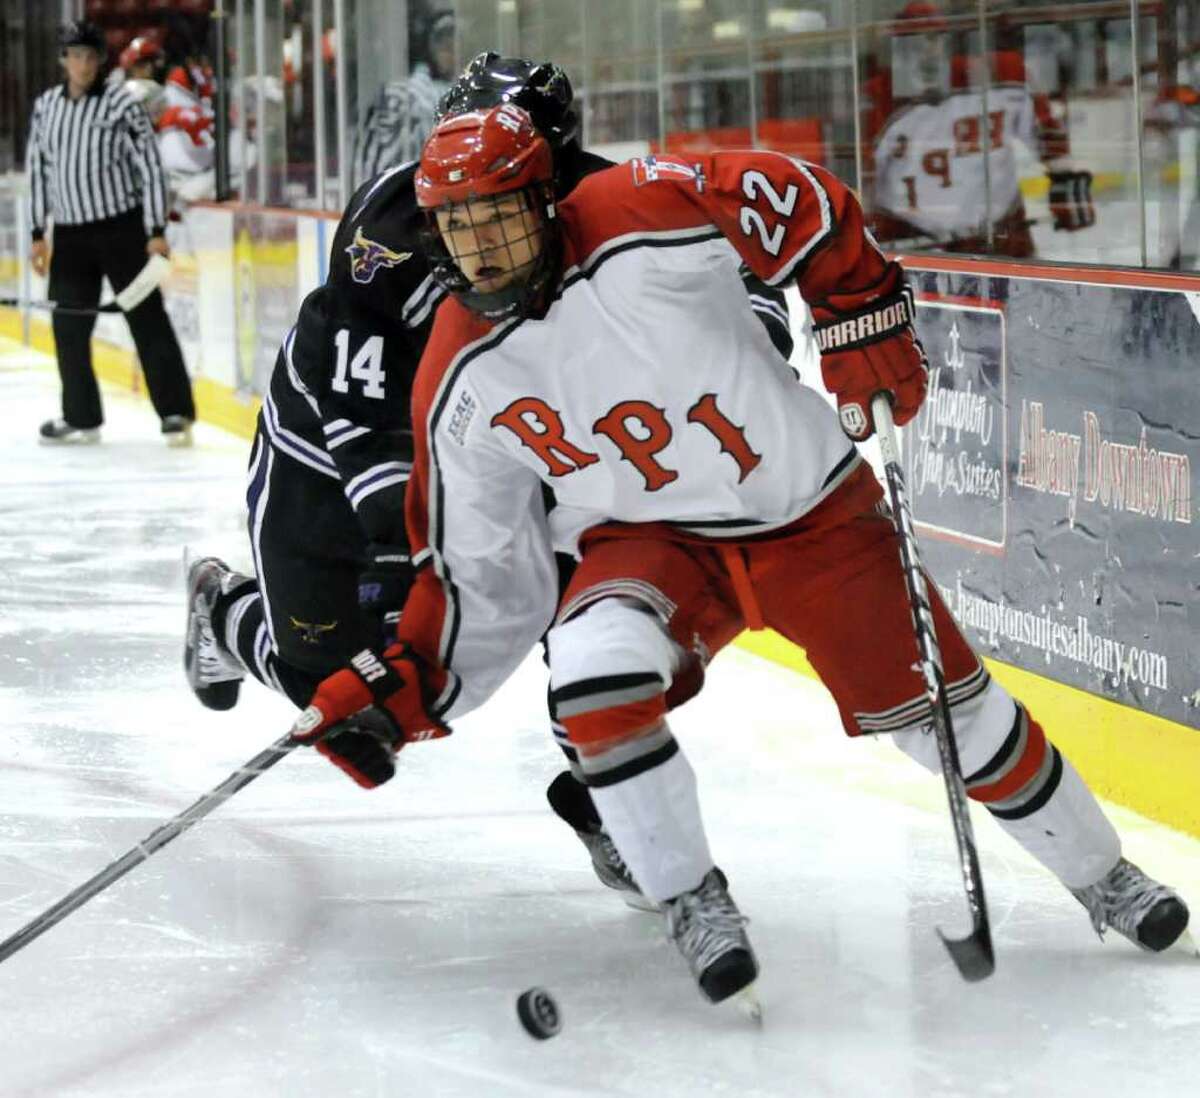 RPI'S C.J. Lee (22), right, battles for a loose puck with Minnesota State's Justin Jokinen (14) during their hockey game on Friday, Oct. 7, 2011, at Rensselaer Polytechnic Institute in Troy, N.Y. (Cindy Schultz / Times Union)